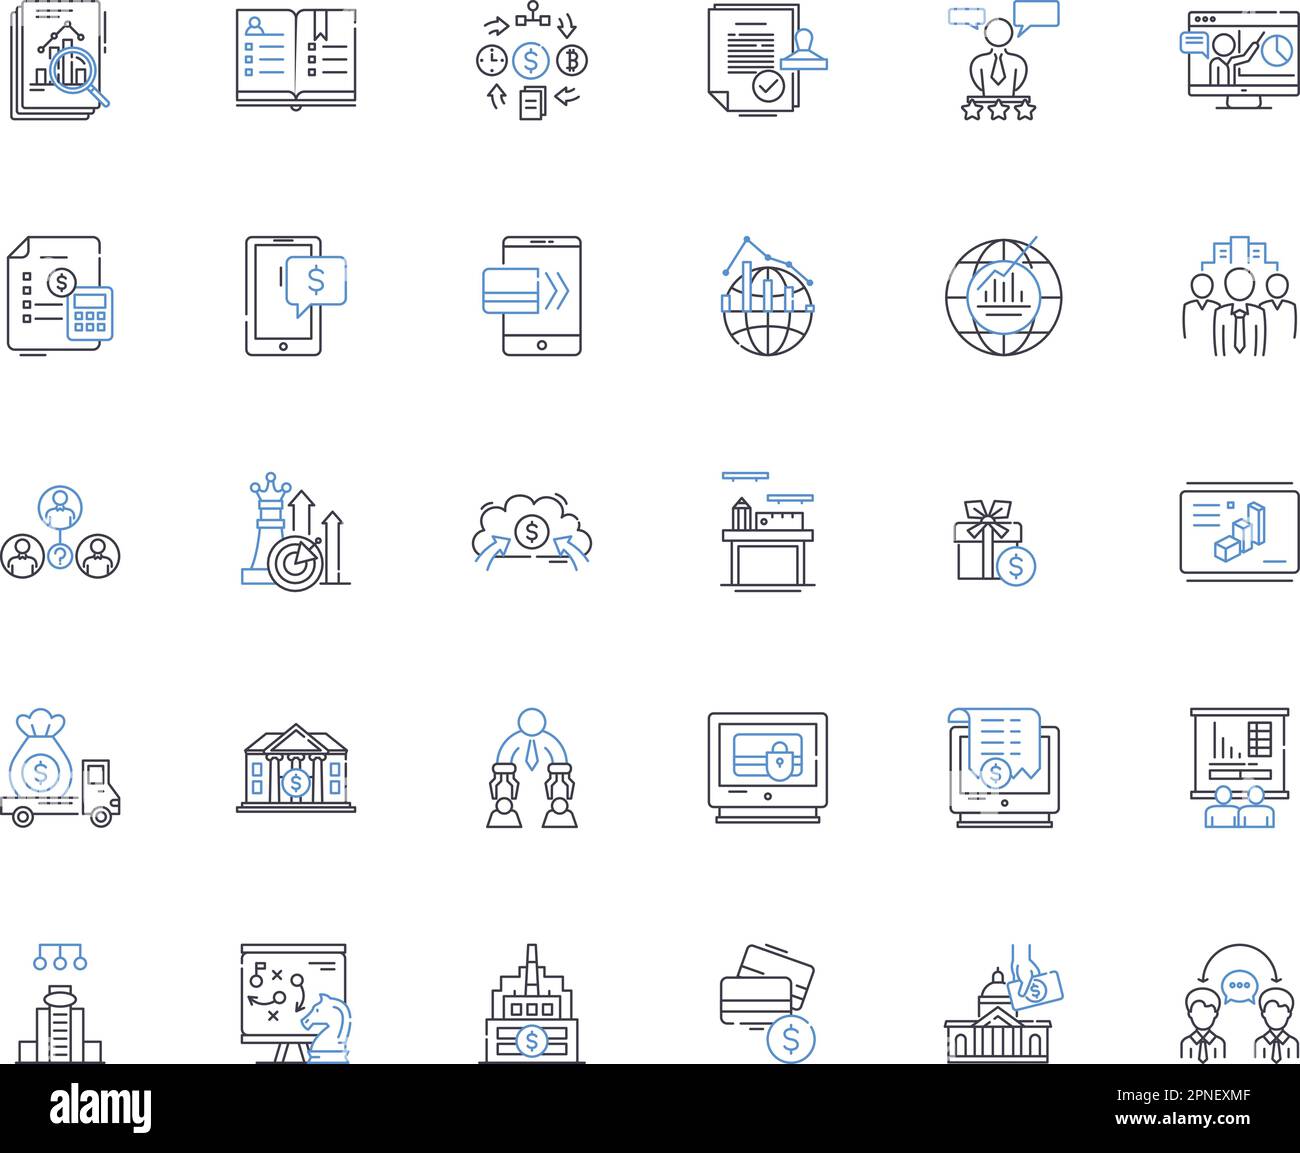 Credit union line icons collection. Community, Cooperative, Member-owned, Savings, Loans, Interest, Member services vector and linear illustration Stock Vector